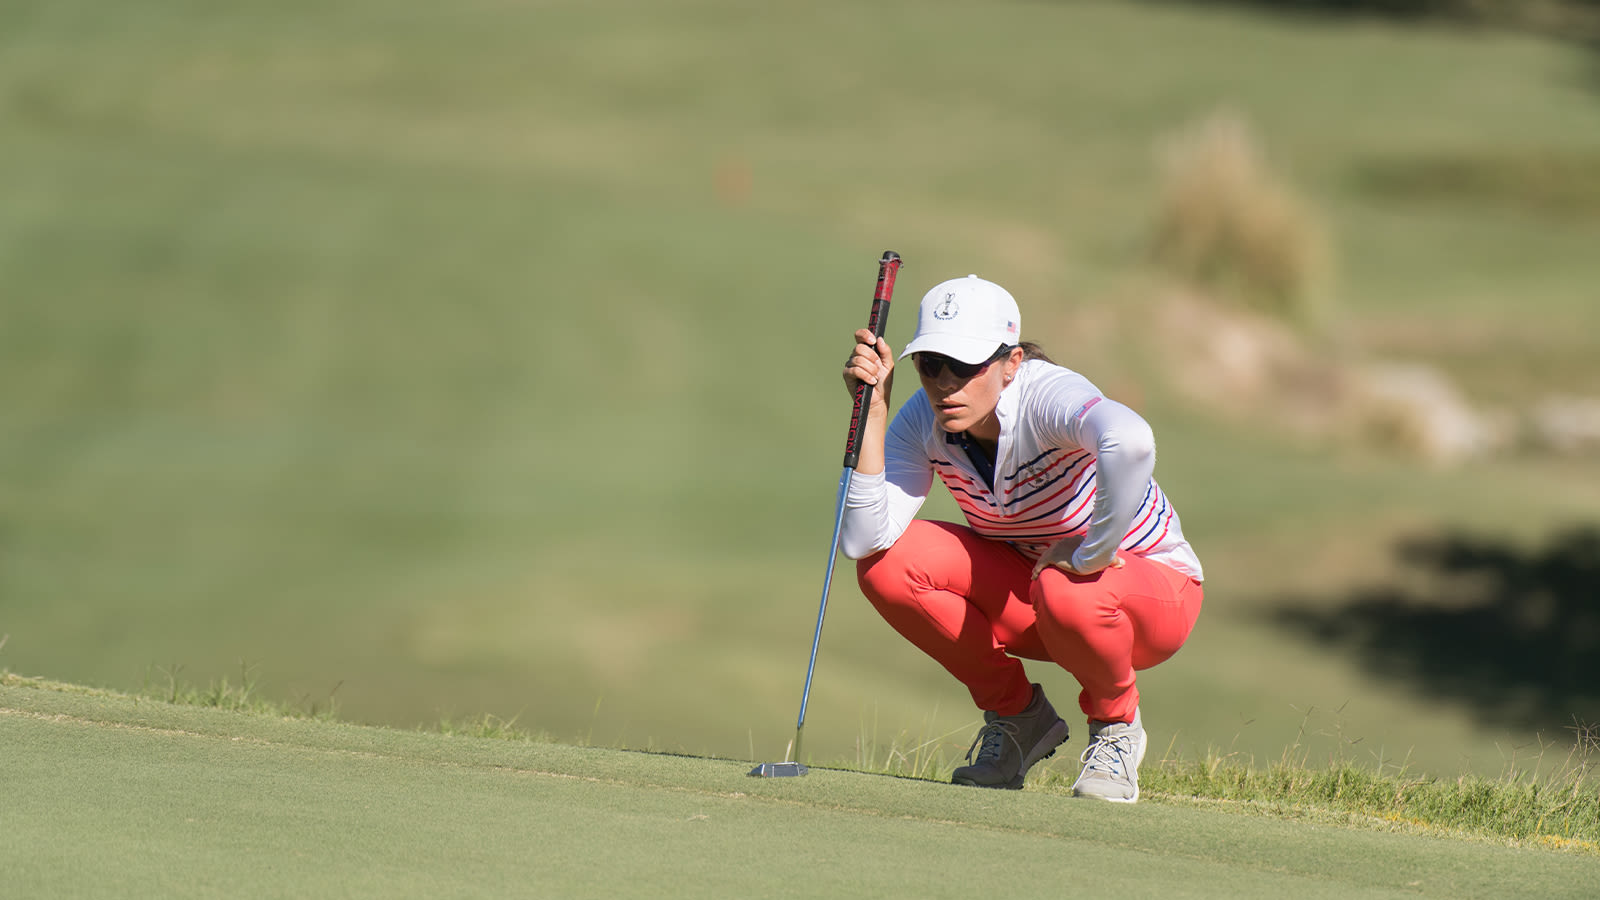 Joanna Coe of the United States during the final round for the 2019 Women’s PGA Cup held at the Omni Barton Creek Resort & Spa on October 26, 2019 in Austin, Texas. (Photo by Hailey Garrett/PGA of America)